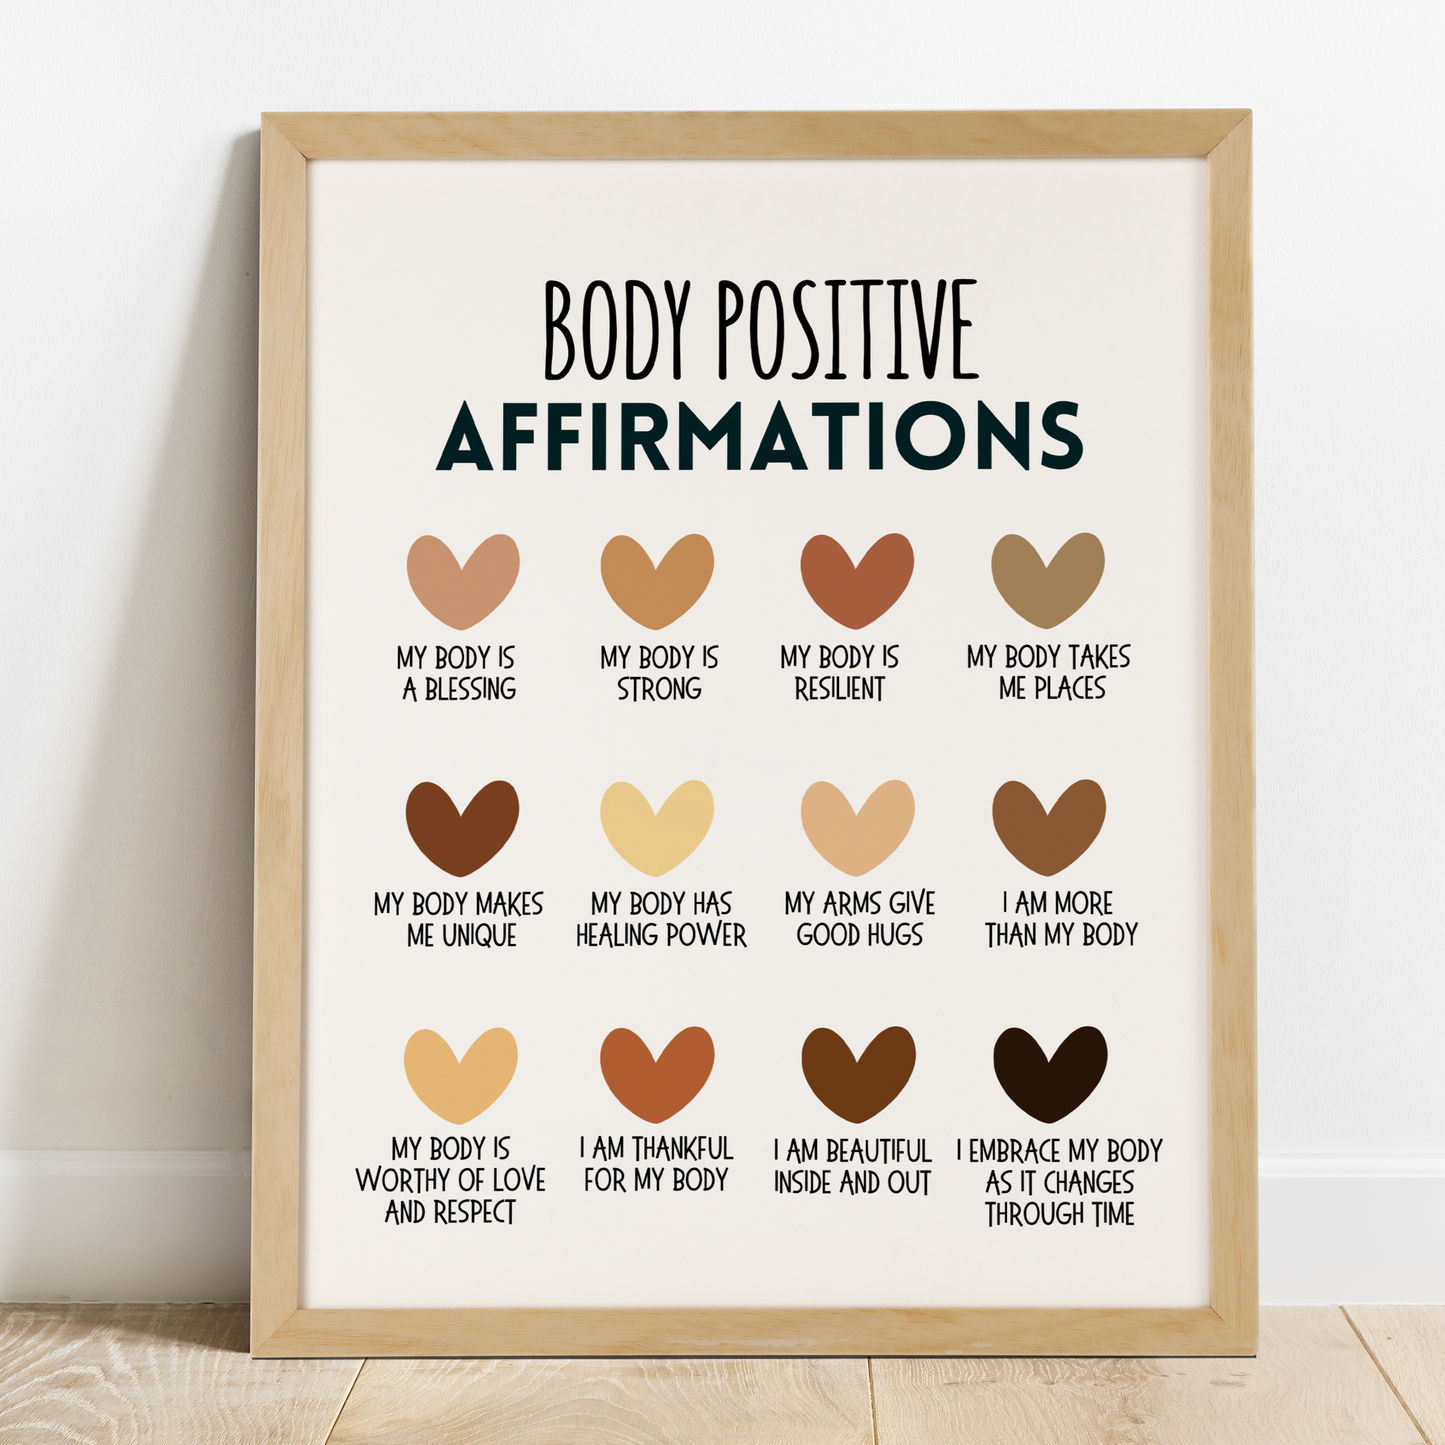 Body Positive Affirmations